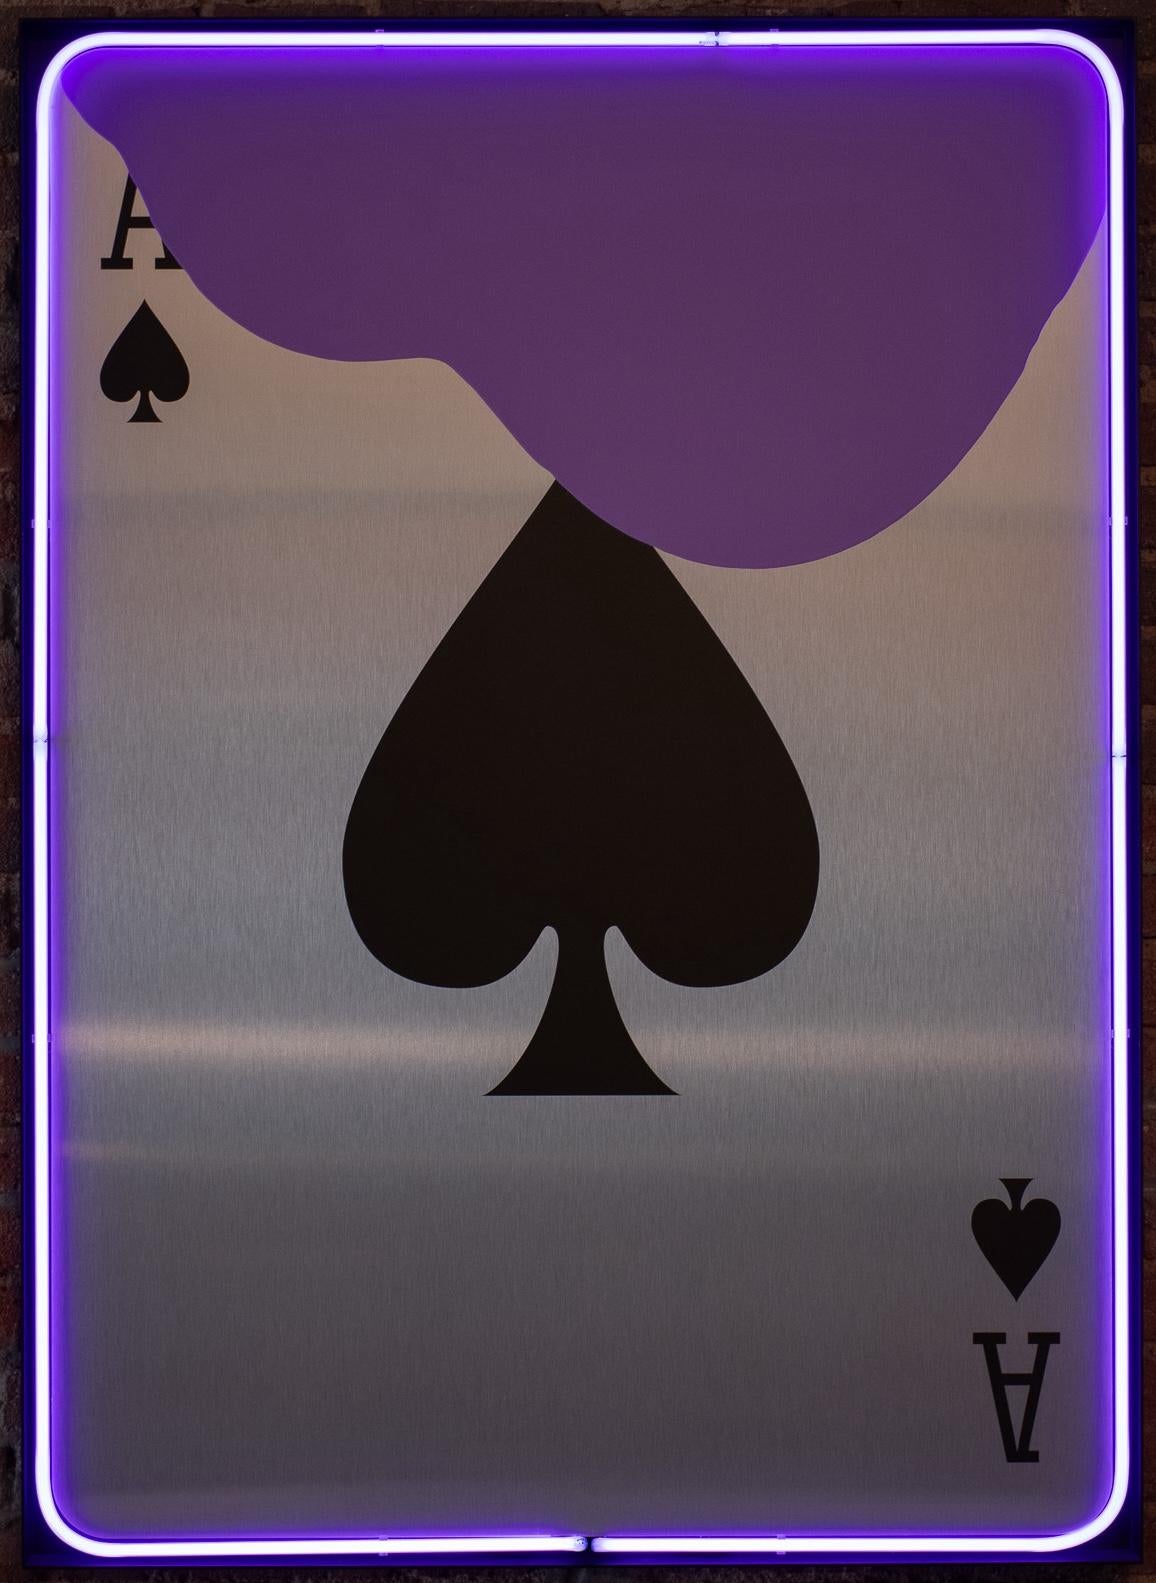 "All In: Ace of Spades (Royal Purple)" 54" x 39" inch by Oleg Char

Medium: UV print on Aluminum Dibond, Acrylic Drip, glass neon, wood backing, metal frame.

THE ARTIST:
Unearth the essence of contemporary art with Oleg Char – artist, award-winning